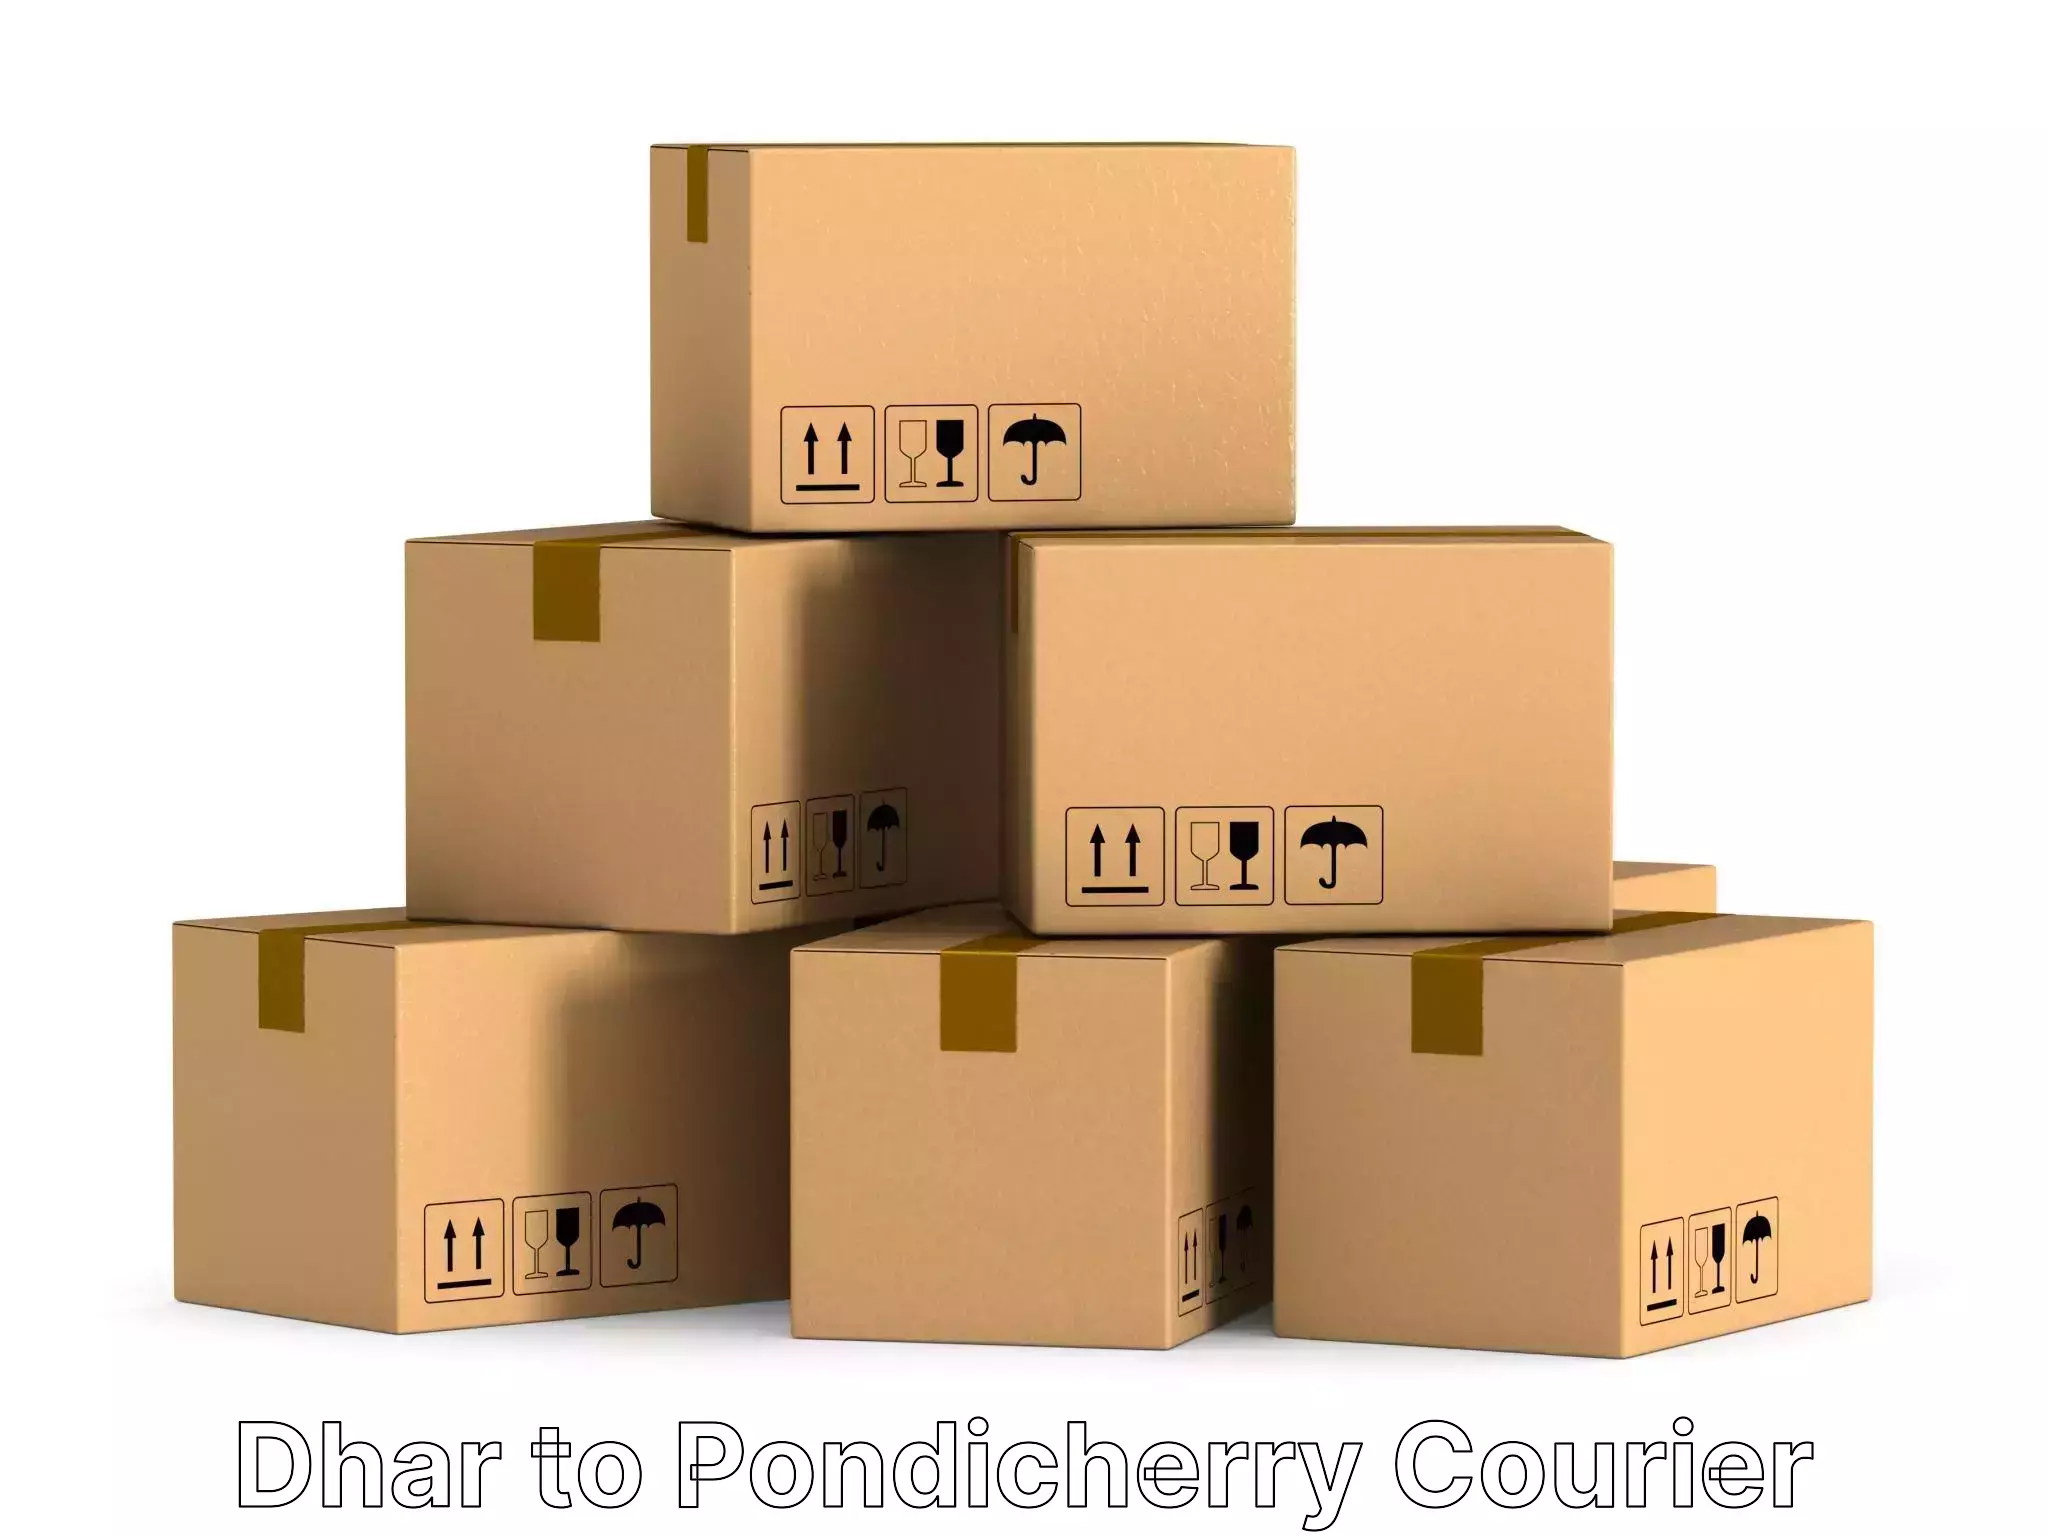 Home relocation experts Dhar to Pondicherry